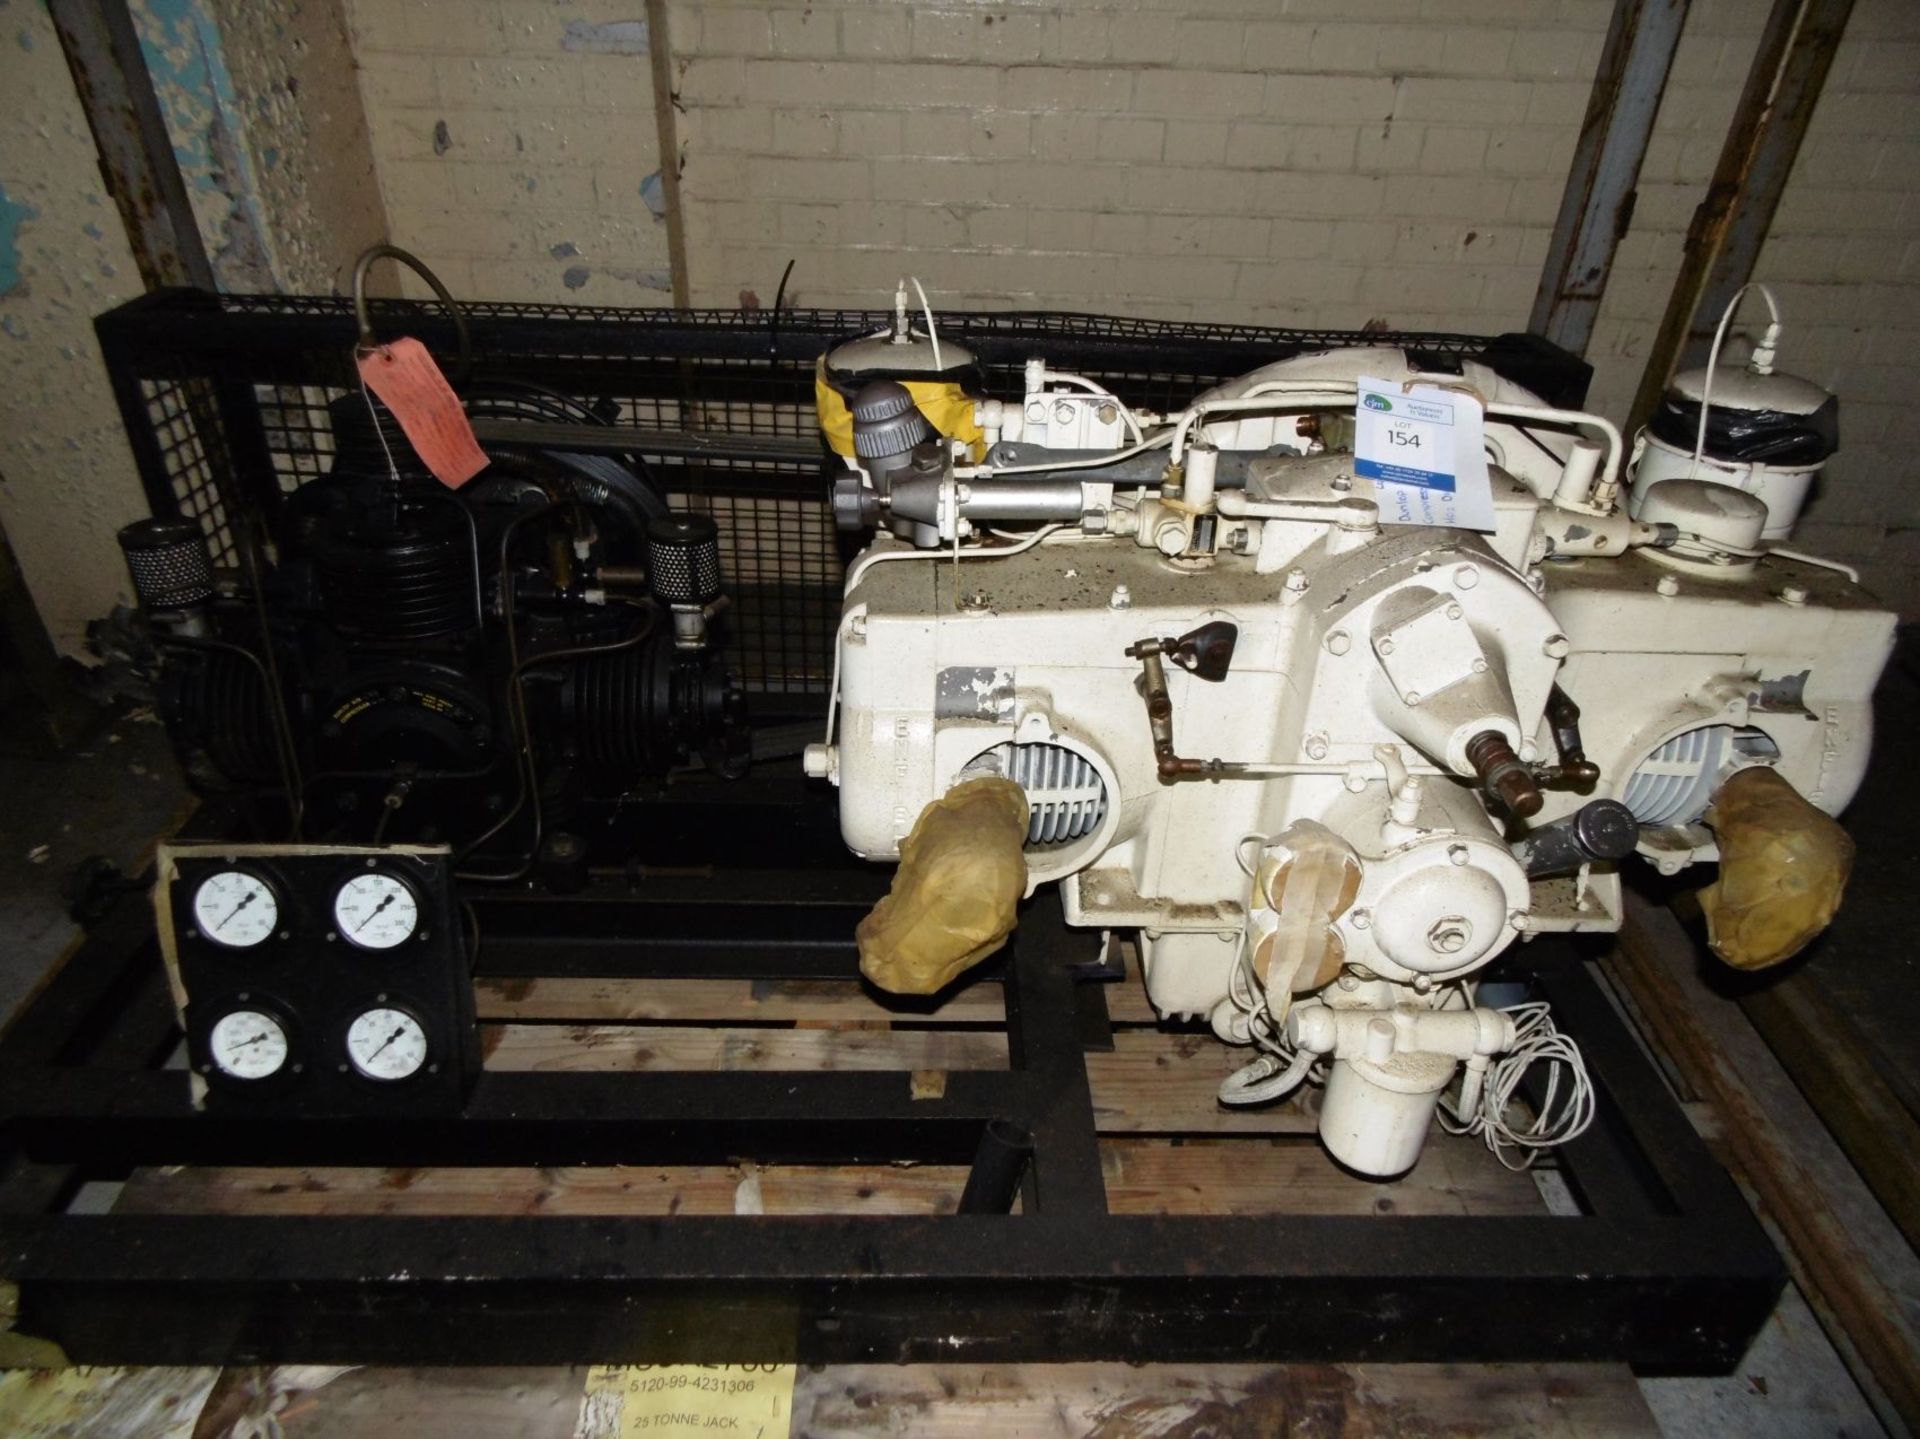 * Diesel Engine Enfield ho2 V twin compressor for diving use, Max working pressure1200PSI unused